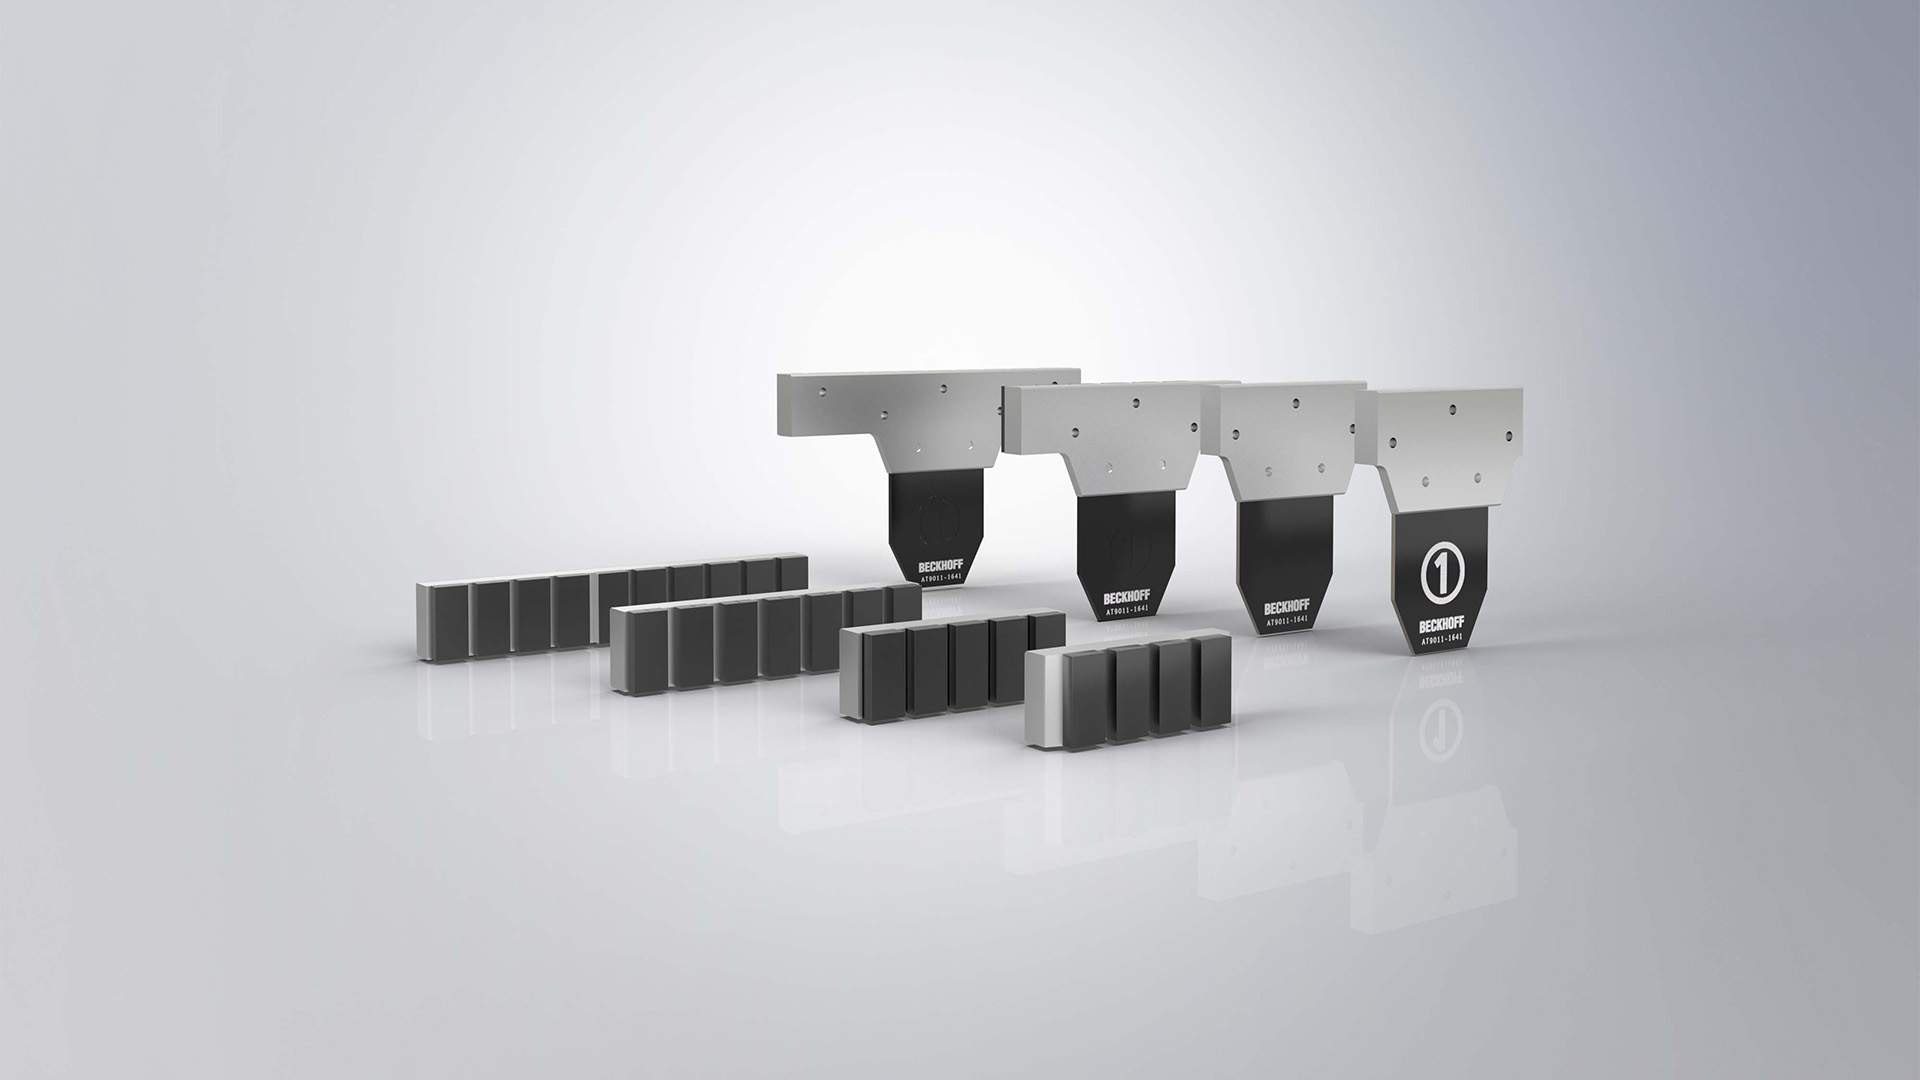 XTS magnetic plate sets enable scalable performance classes and open up new areas of application.